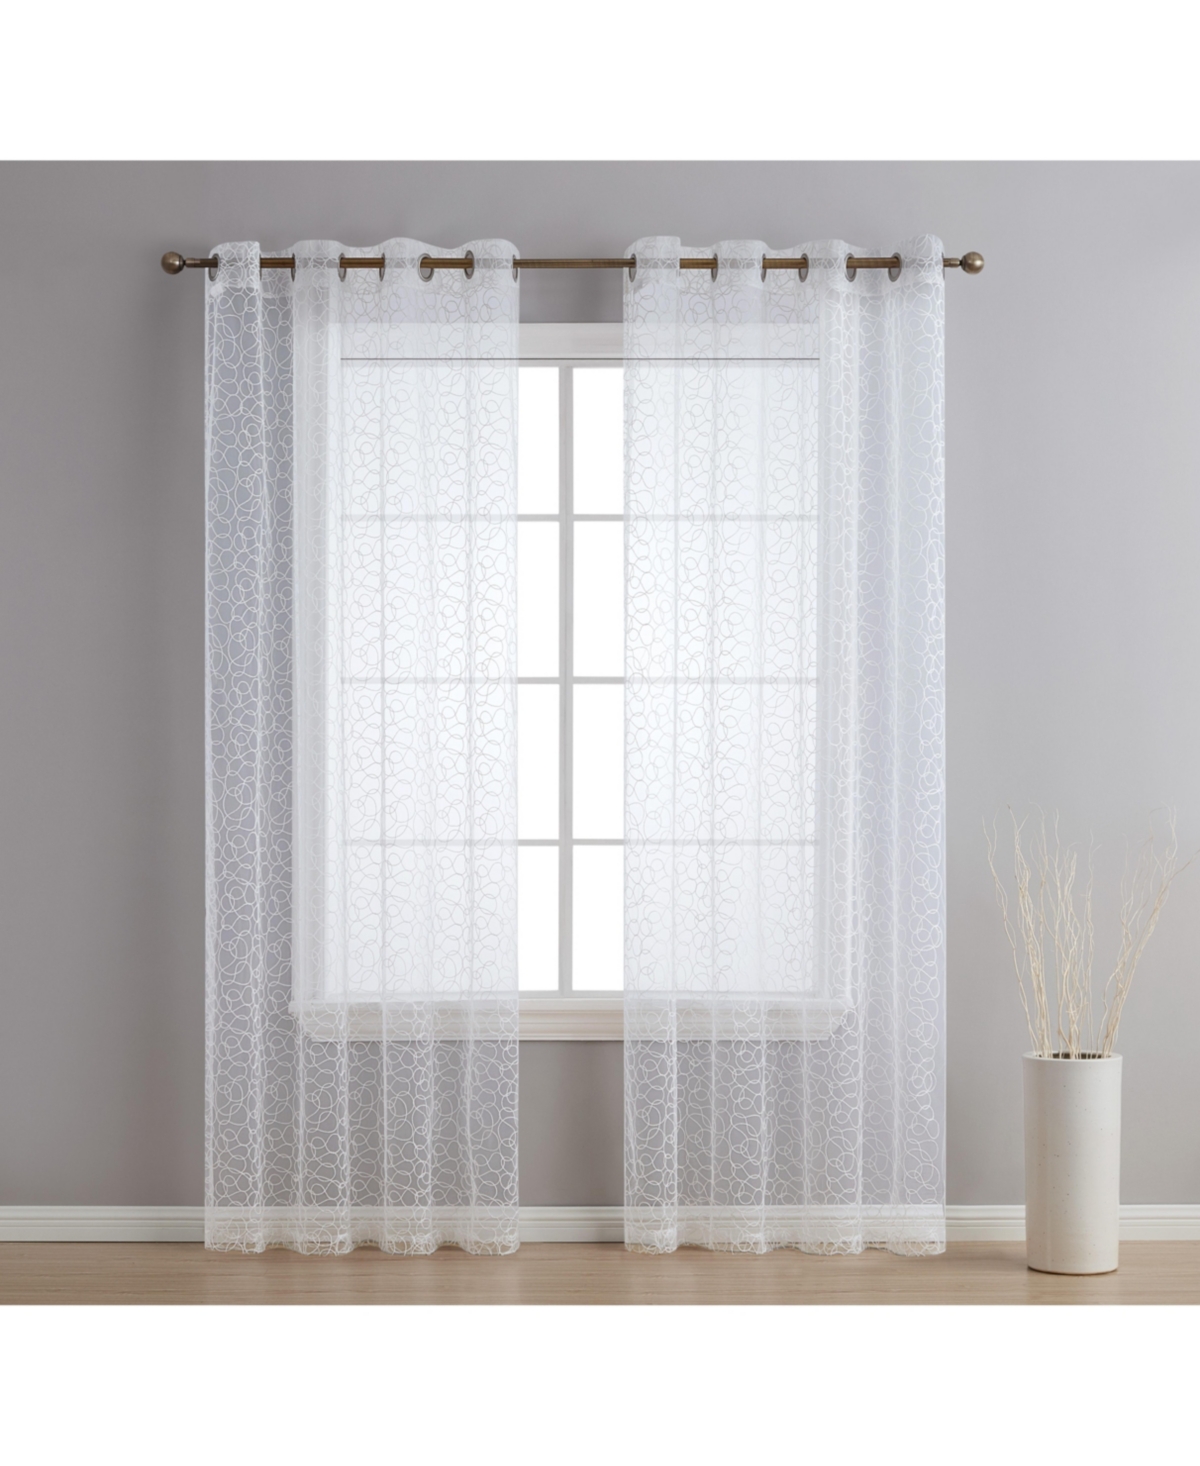 Audrey Embroidered Premium Soft Decorative Sheer Voile Light Filtering Grommet Window Treatment Curtain Drapery Panels for Bedroom & Living Roo